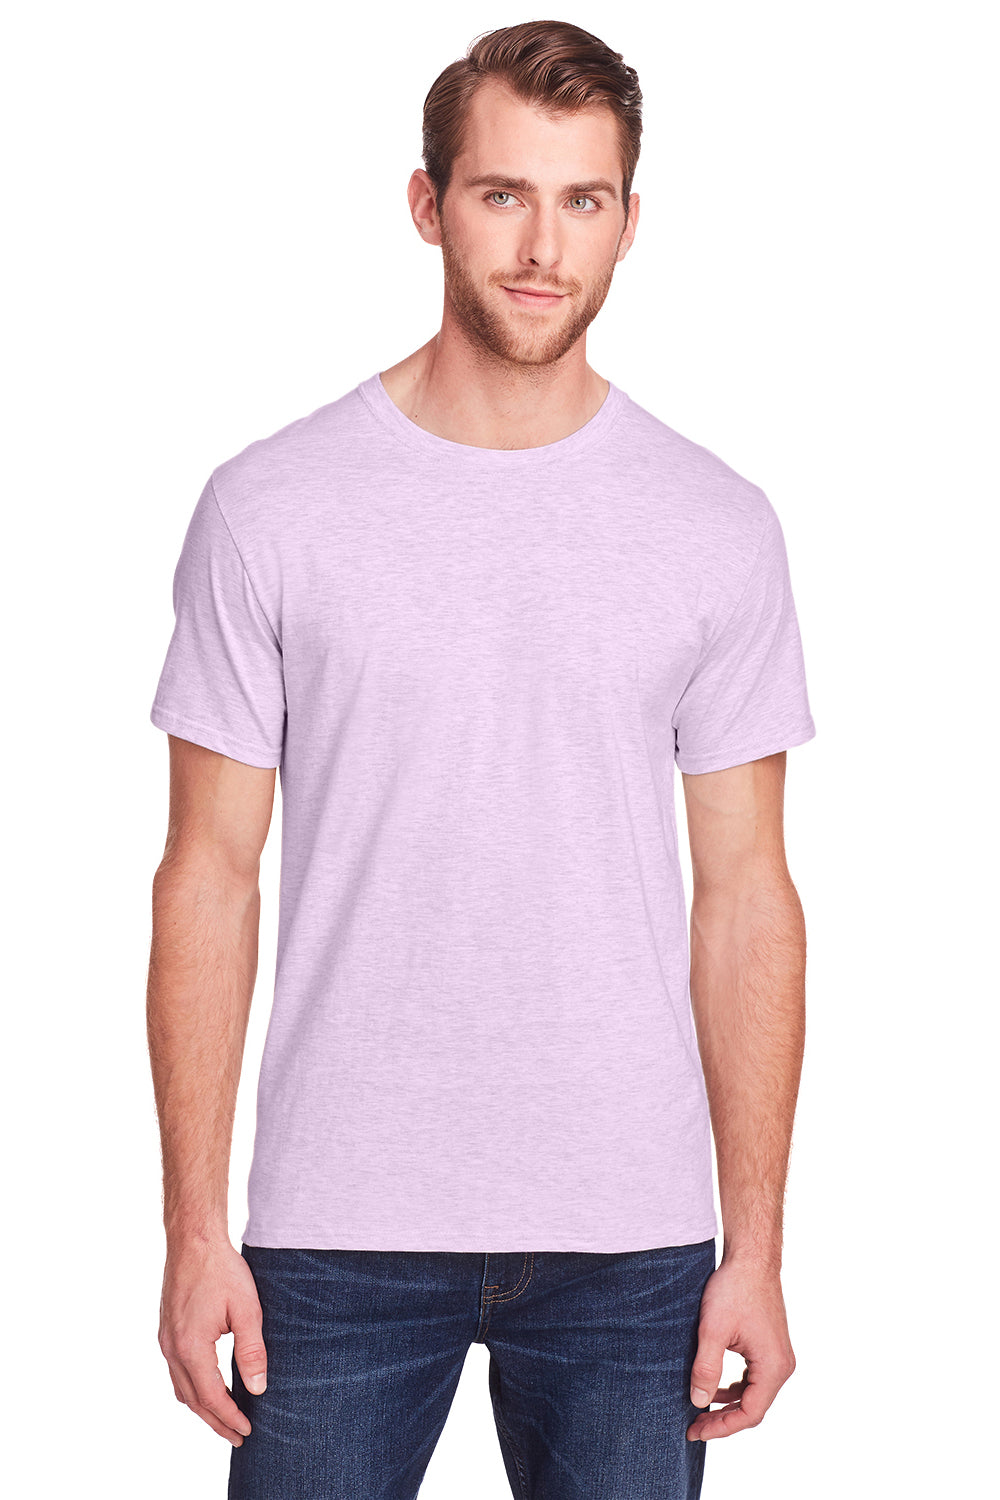 Fruit Of The Loom IC47MR Mens Iconic Short Sleeve Crewneck T-Shirt Heather Pink Front